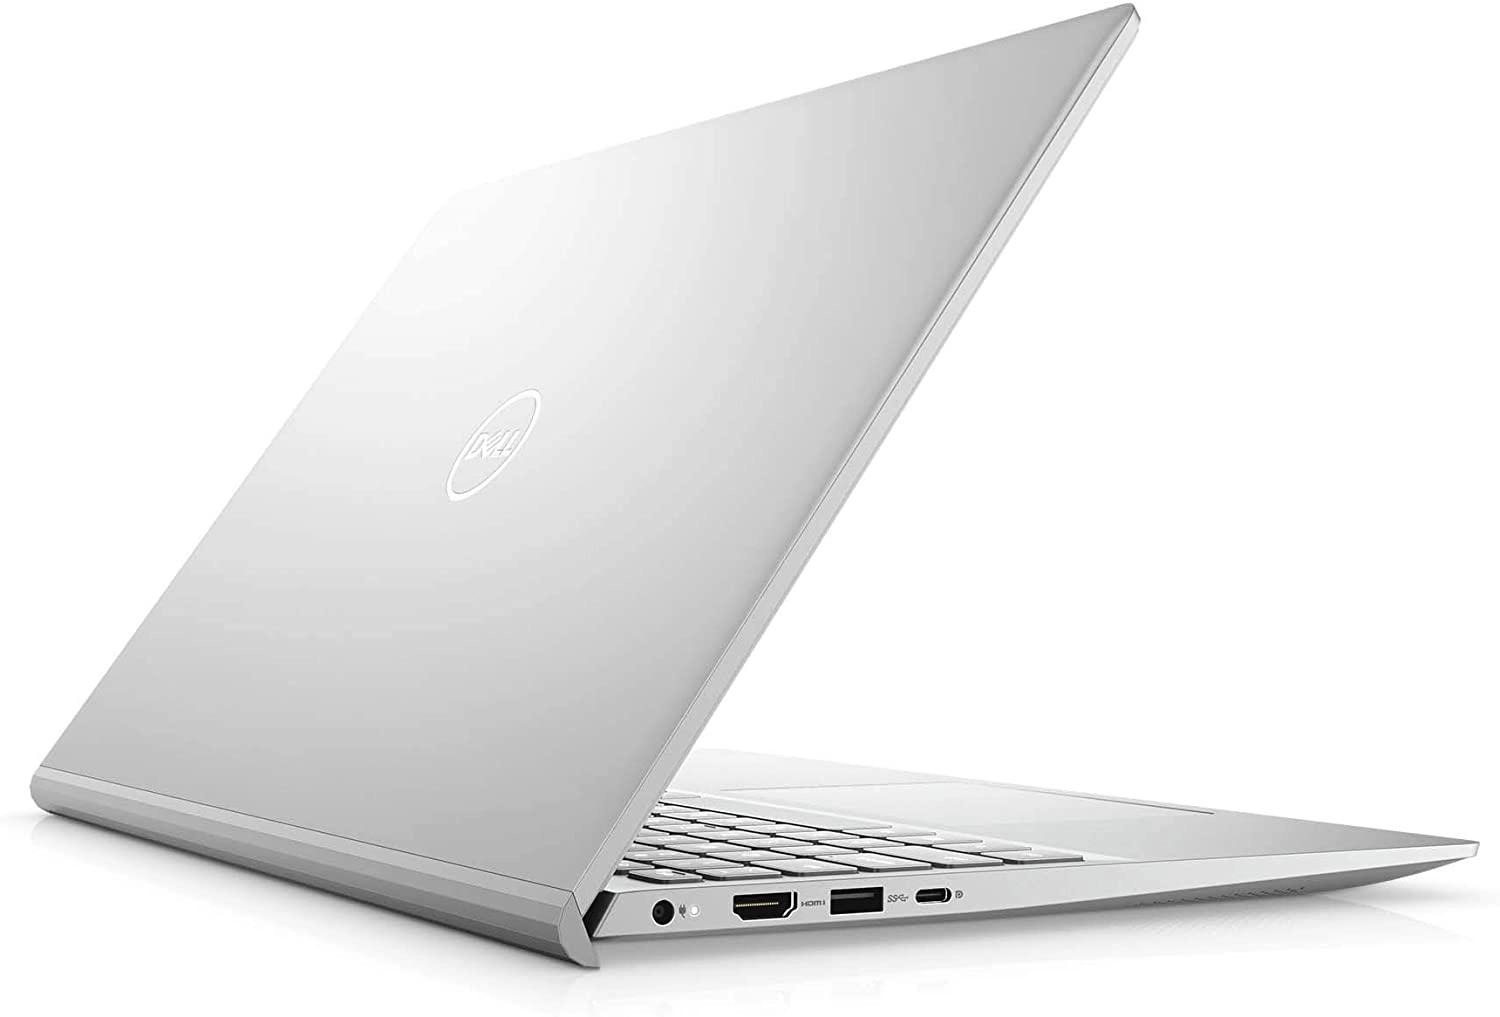 Dell Inspiron 15 5502 laptop image